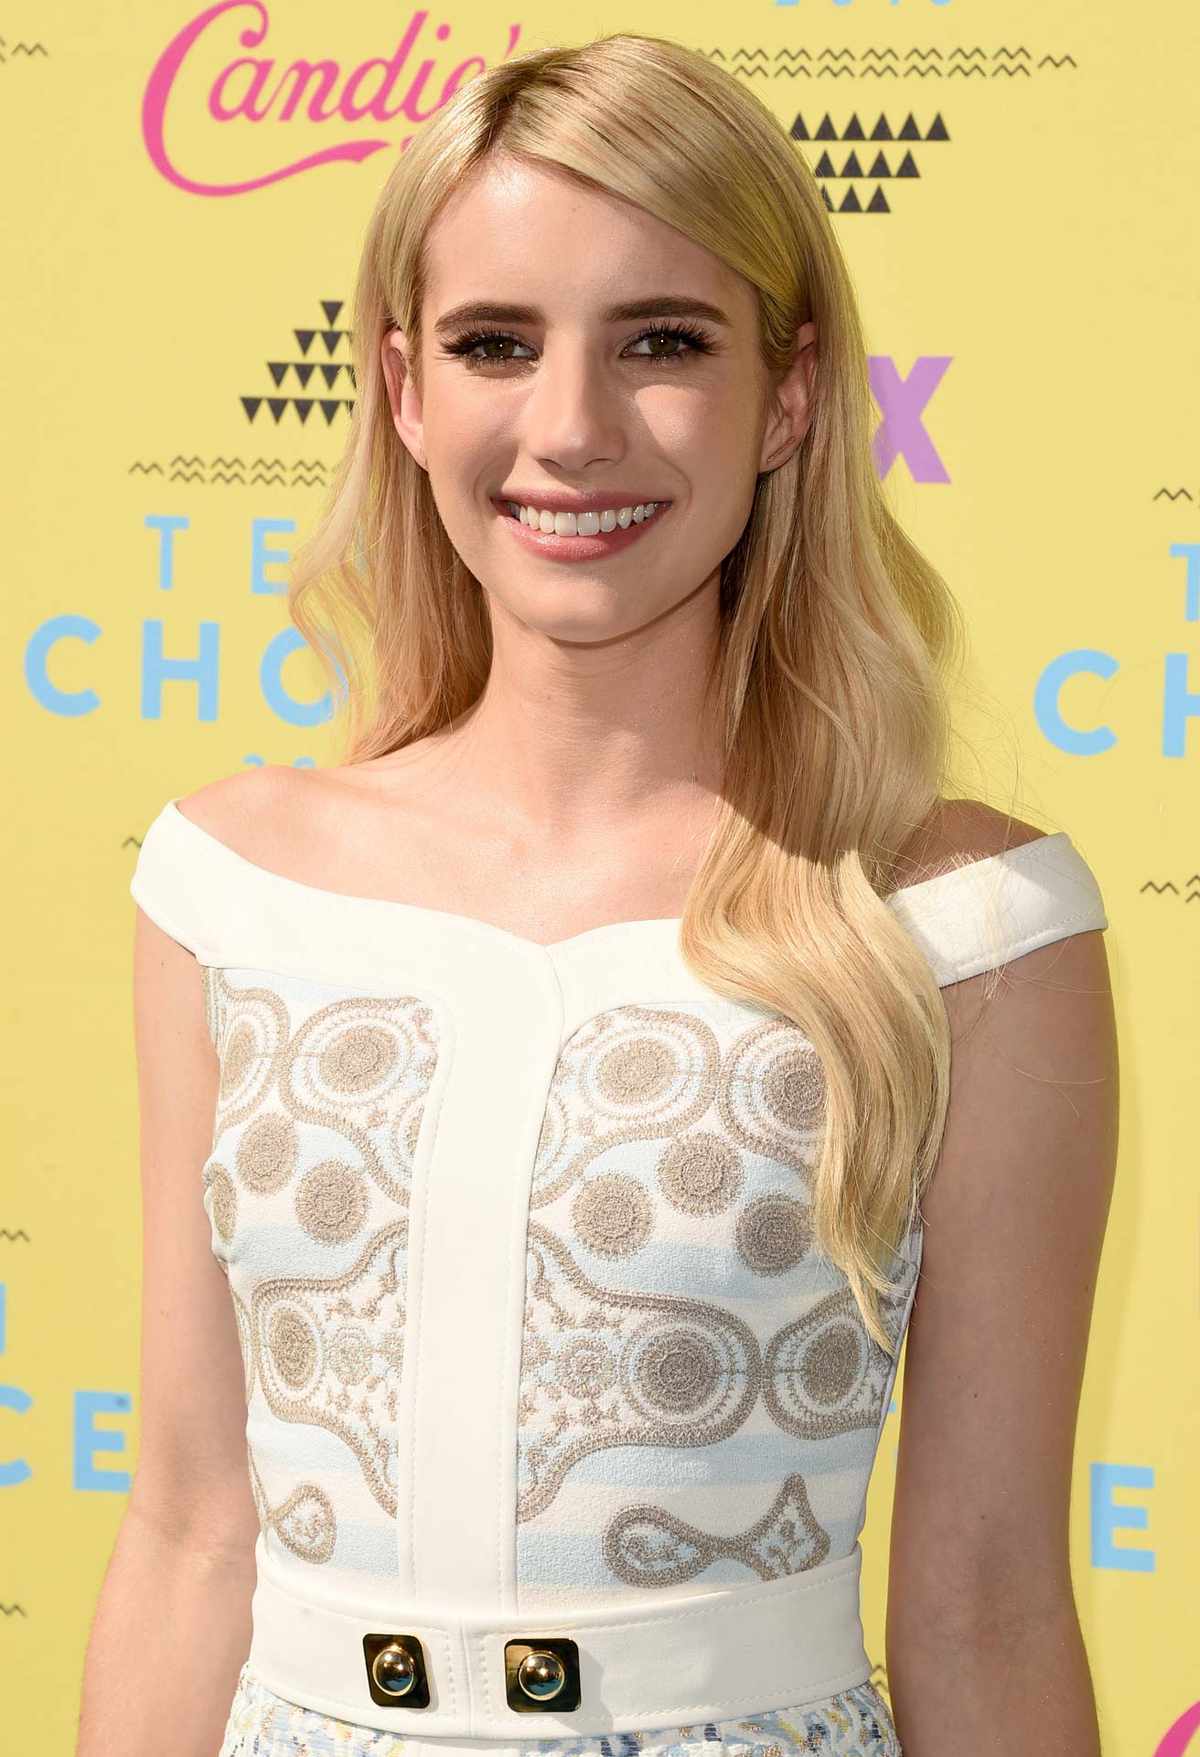 Emma Roberts on Getting Ready for the Red Carpet | InStyle